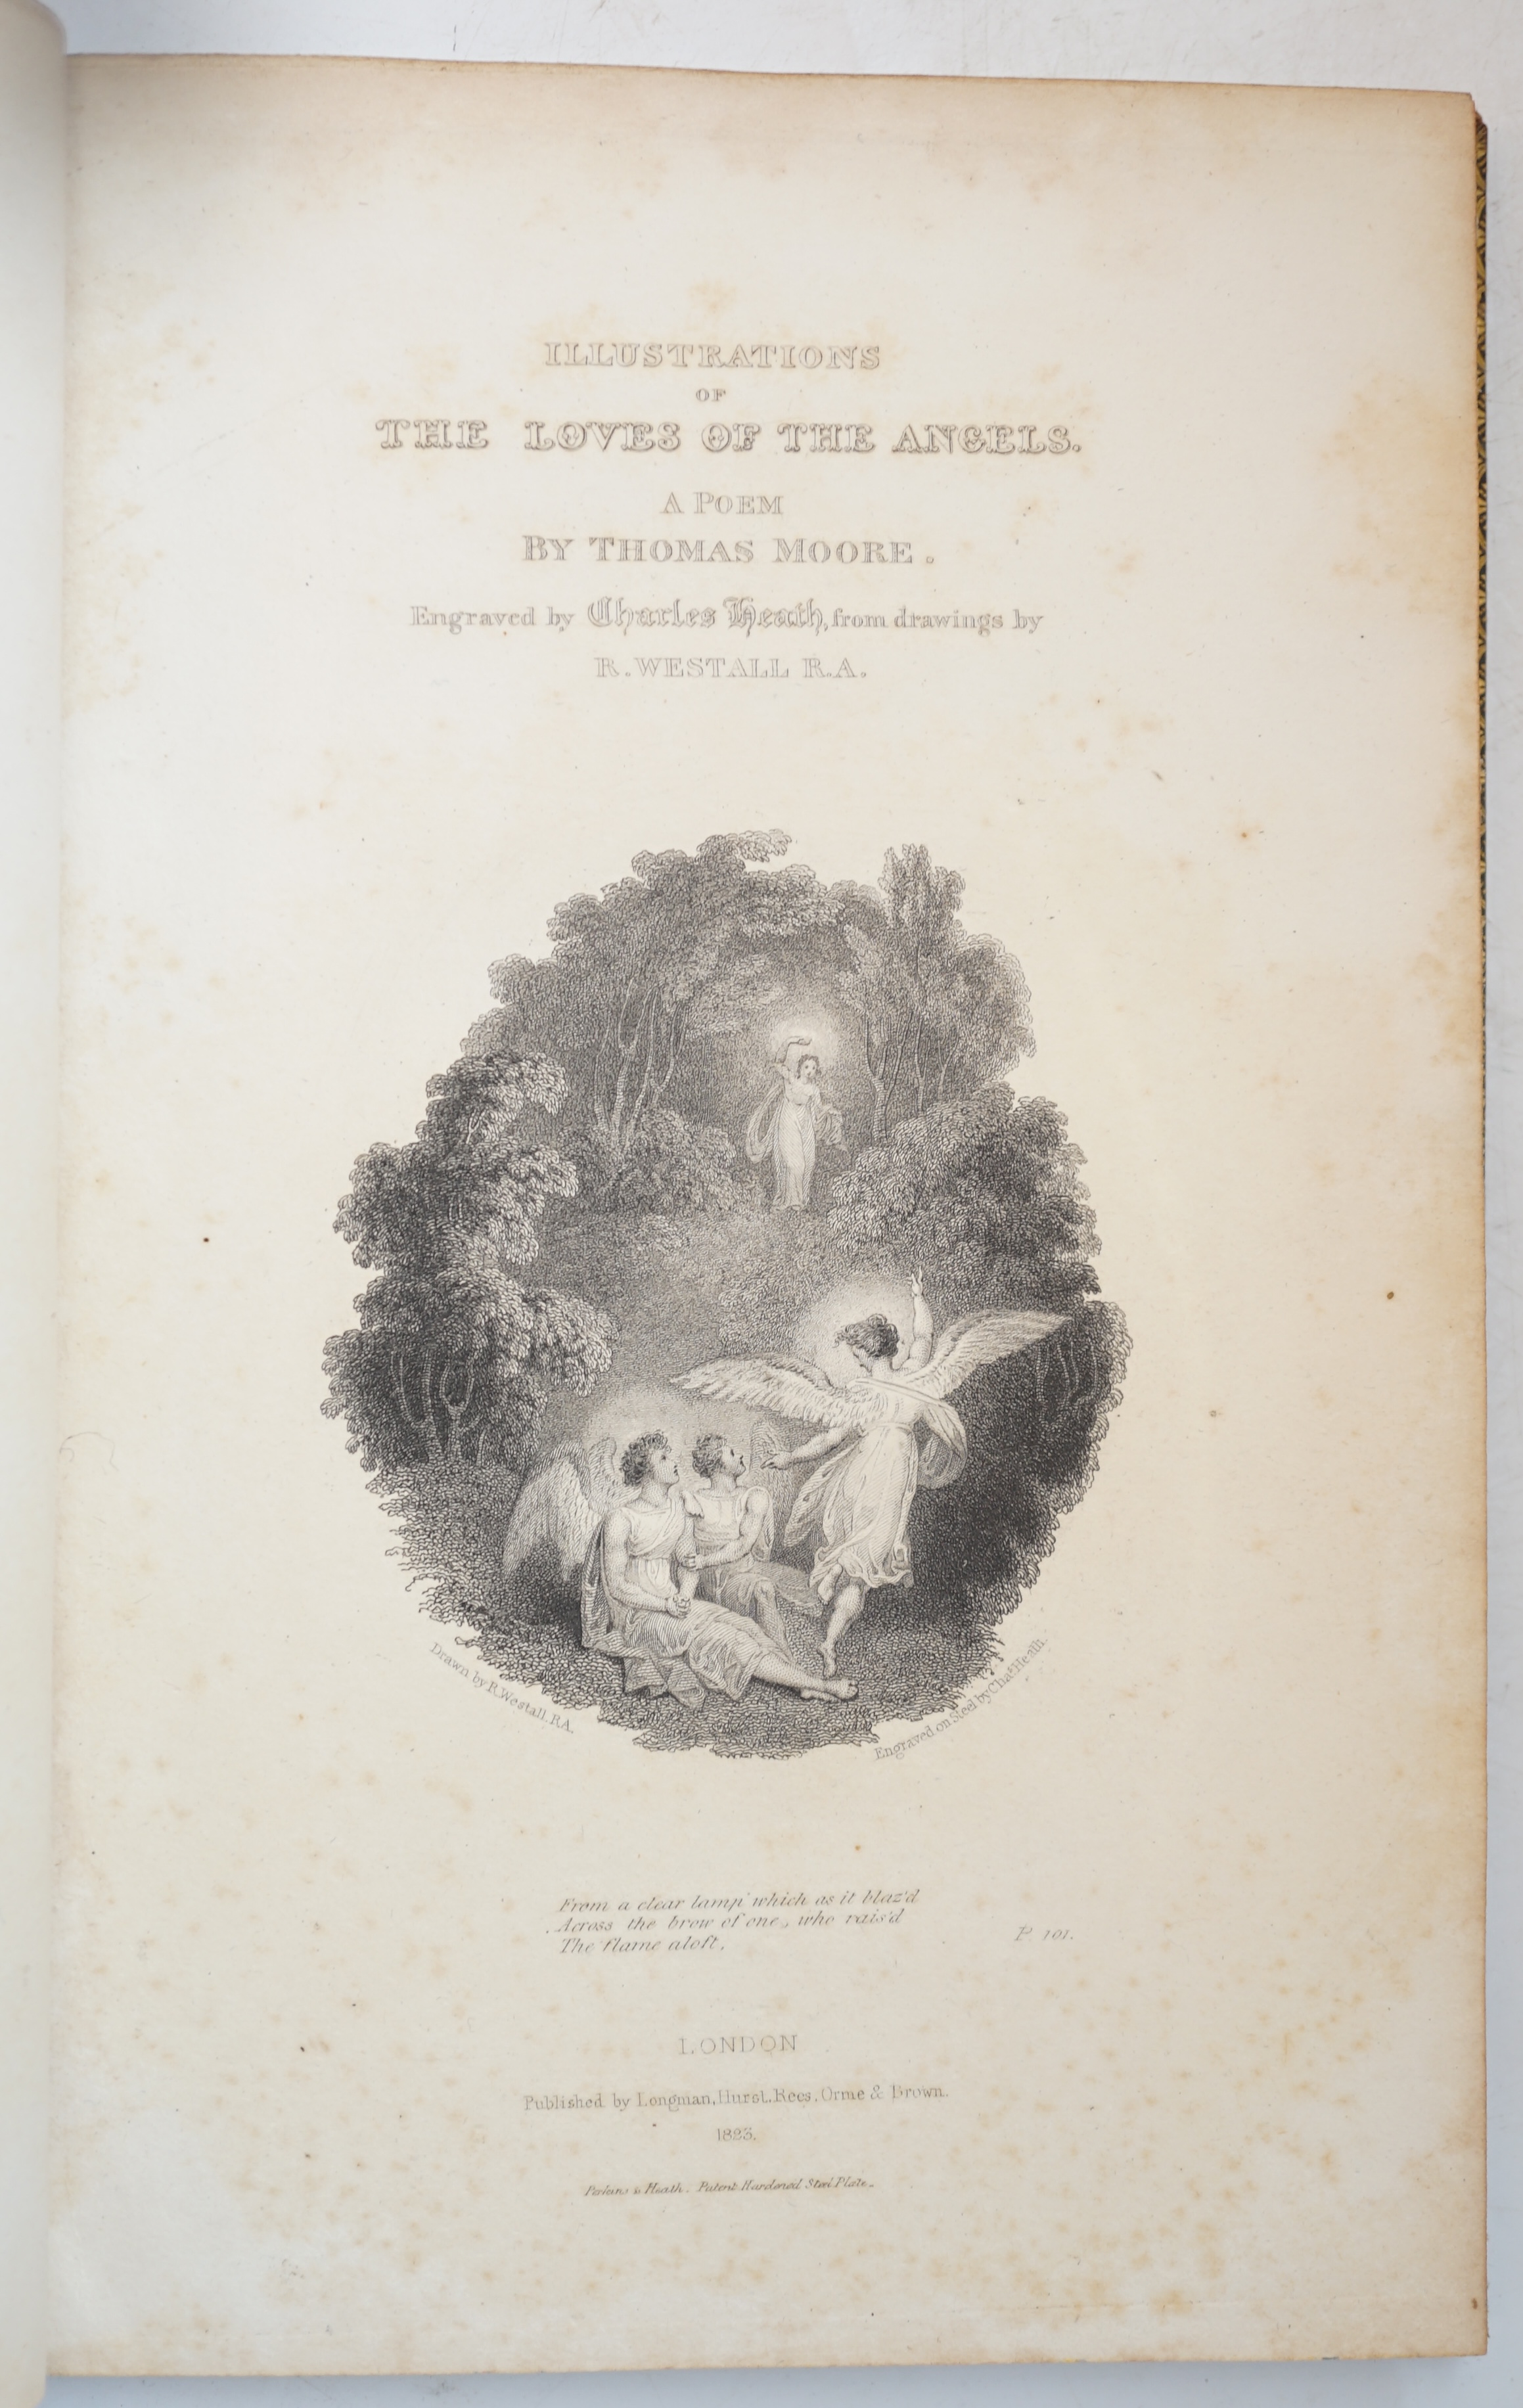 Moore, Thomas - Illustrations of The Love of the Angels, with 4 engraved plates after Richard Westall, 8vo, green morocco gilt, half title and vignette engraved addition title, Longman et al, London, 1823 and Bentivoglio